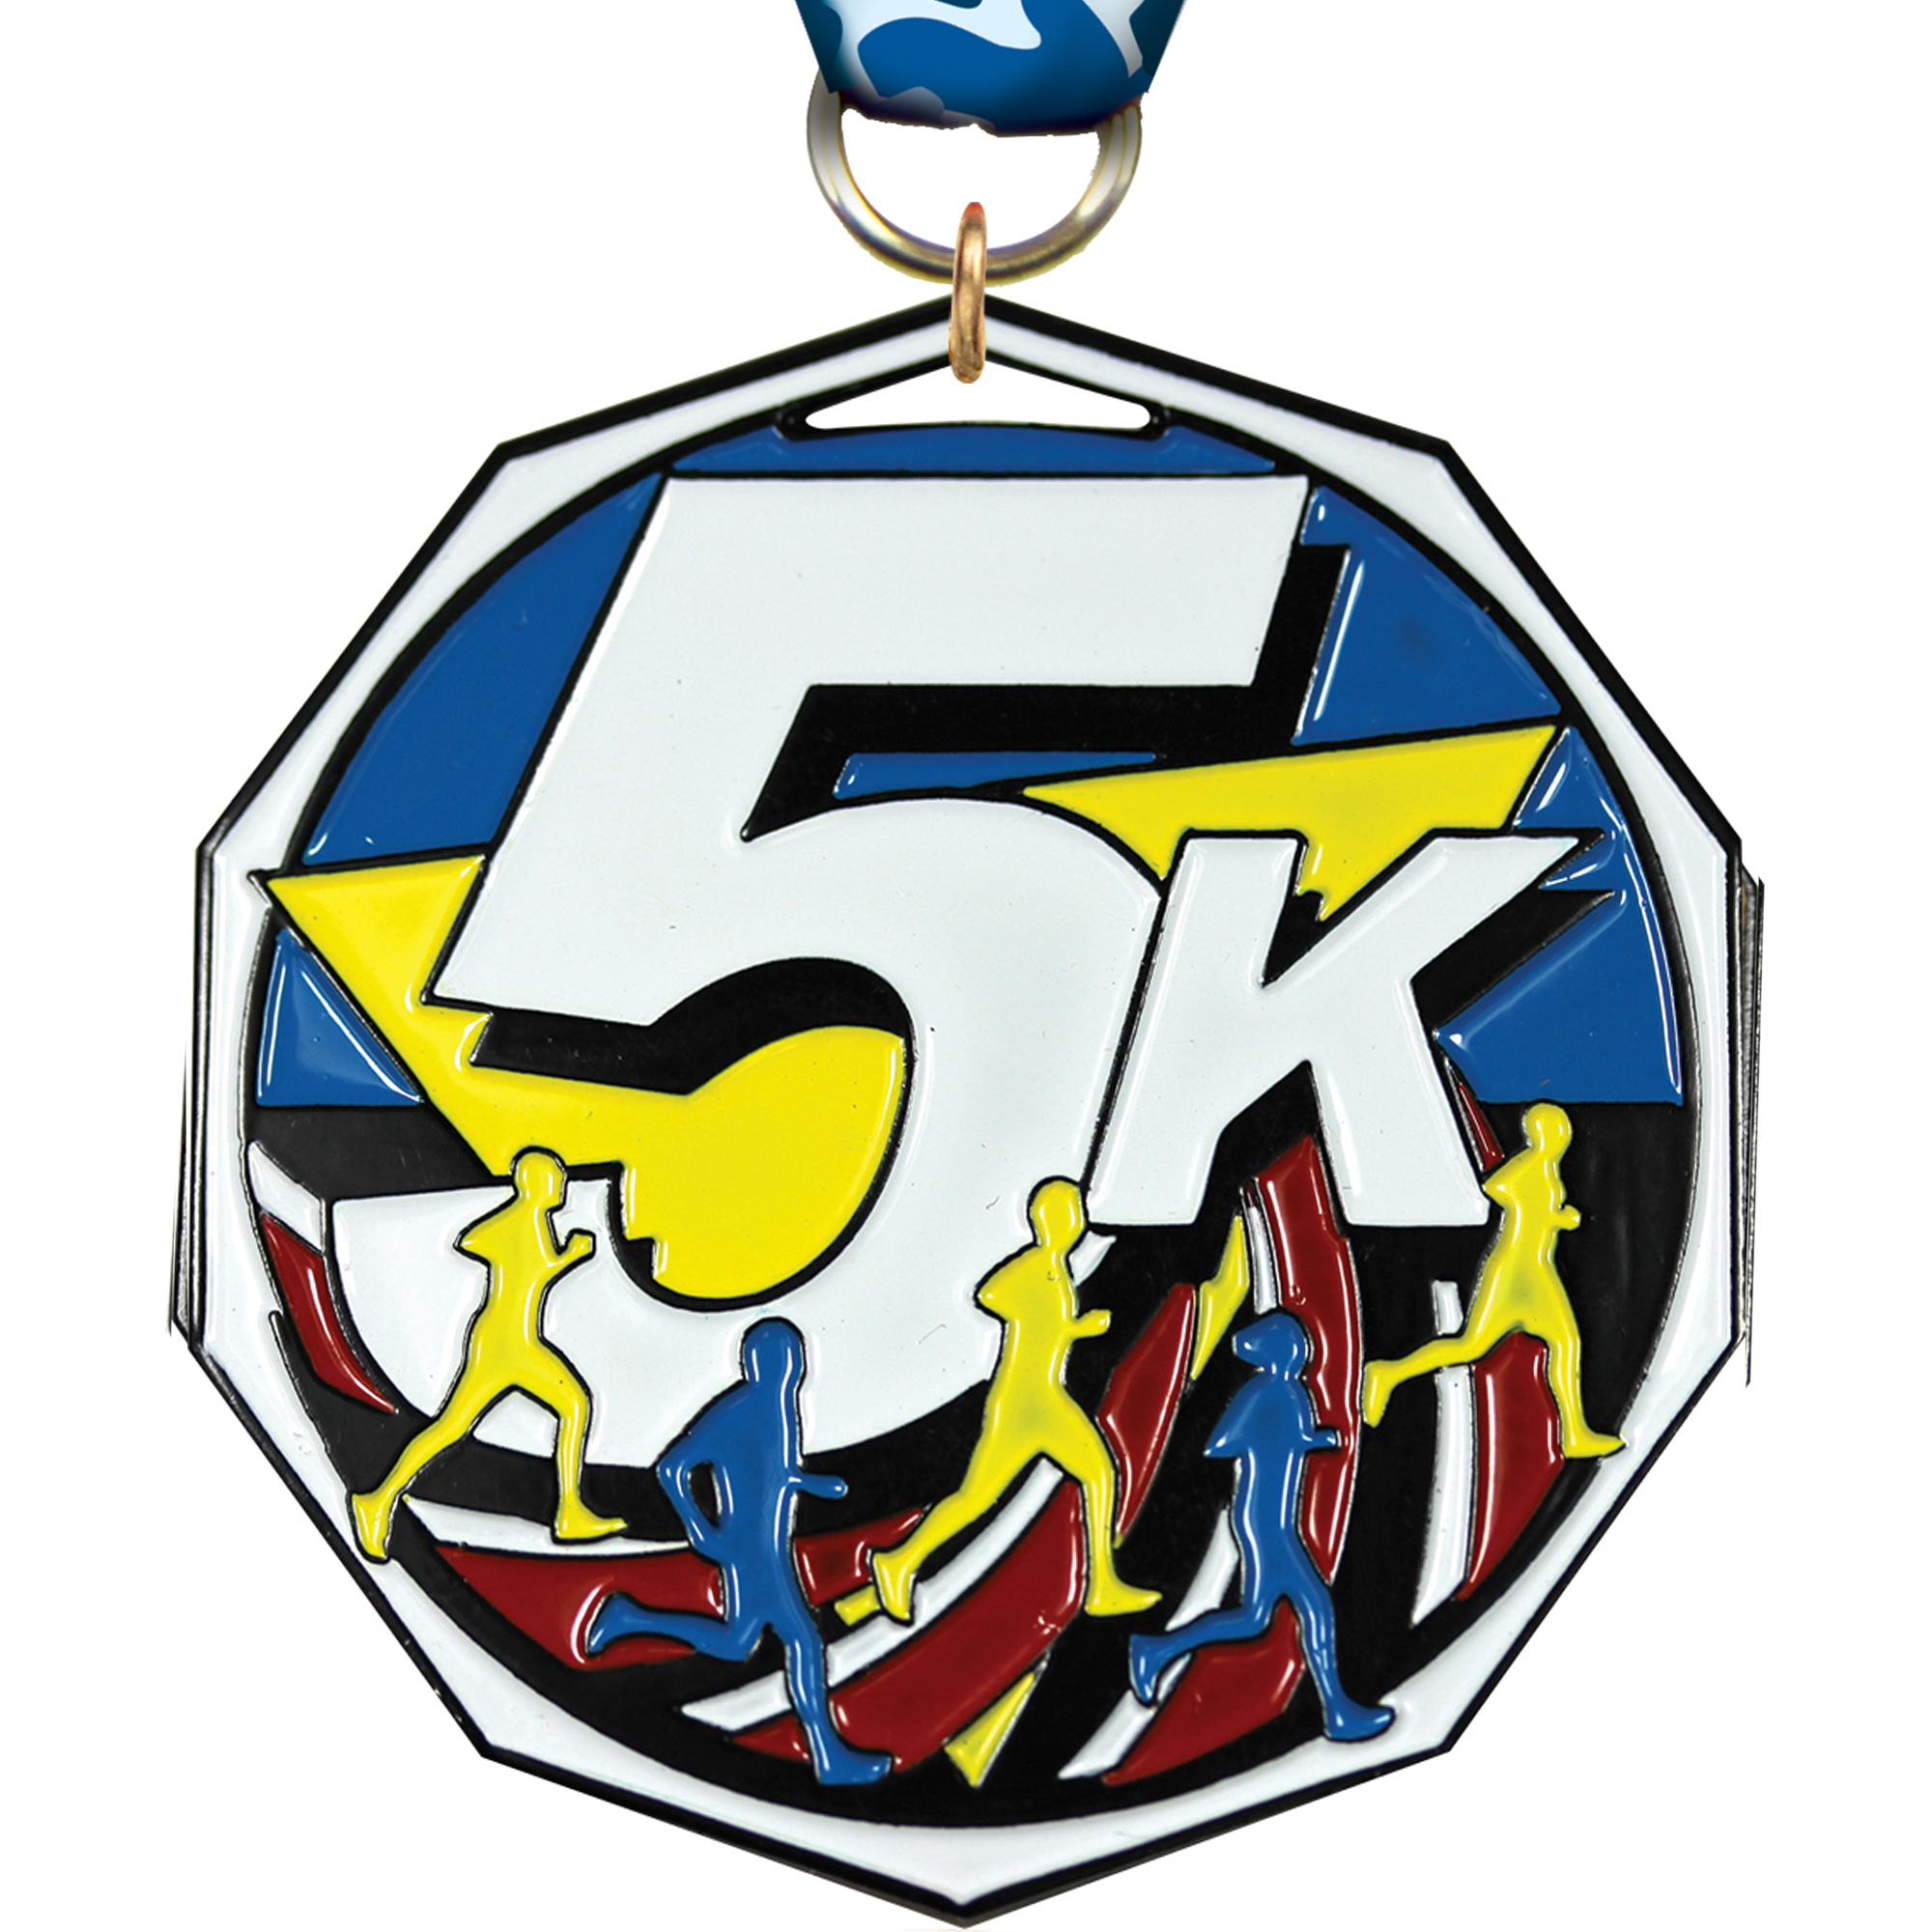 5K Decagon Painted Medal